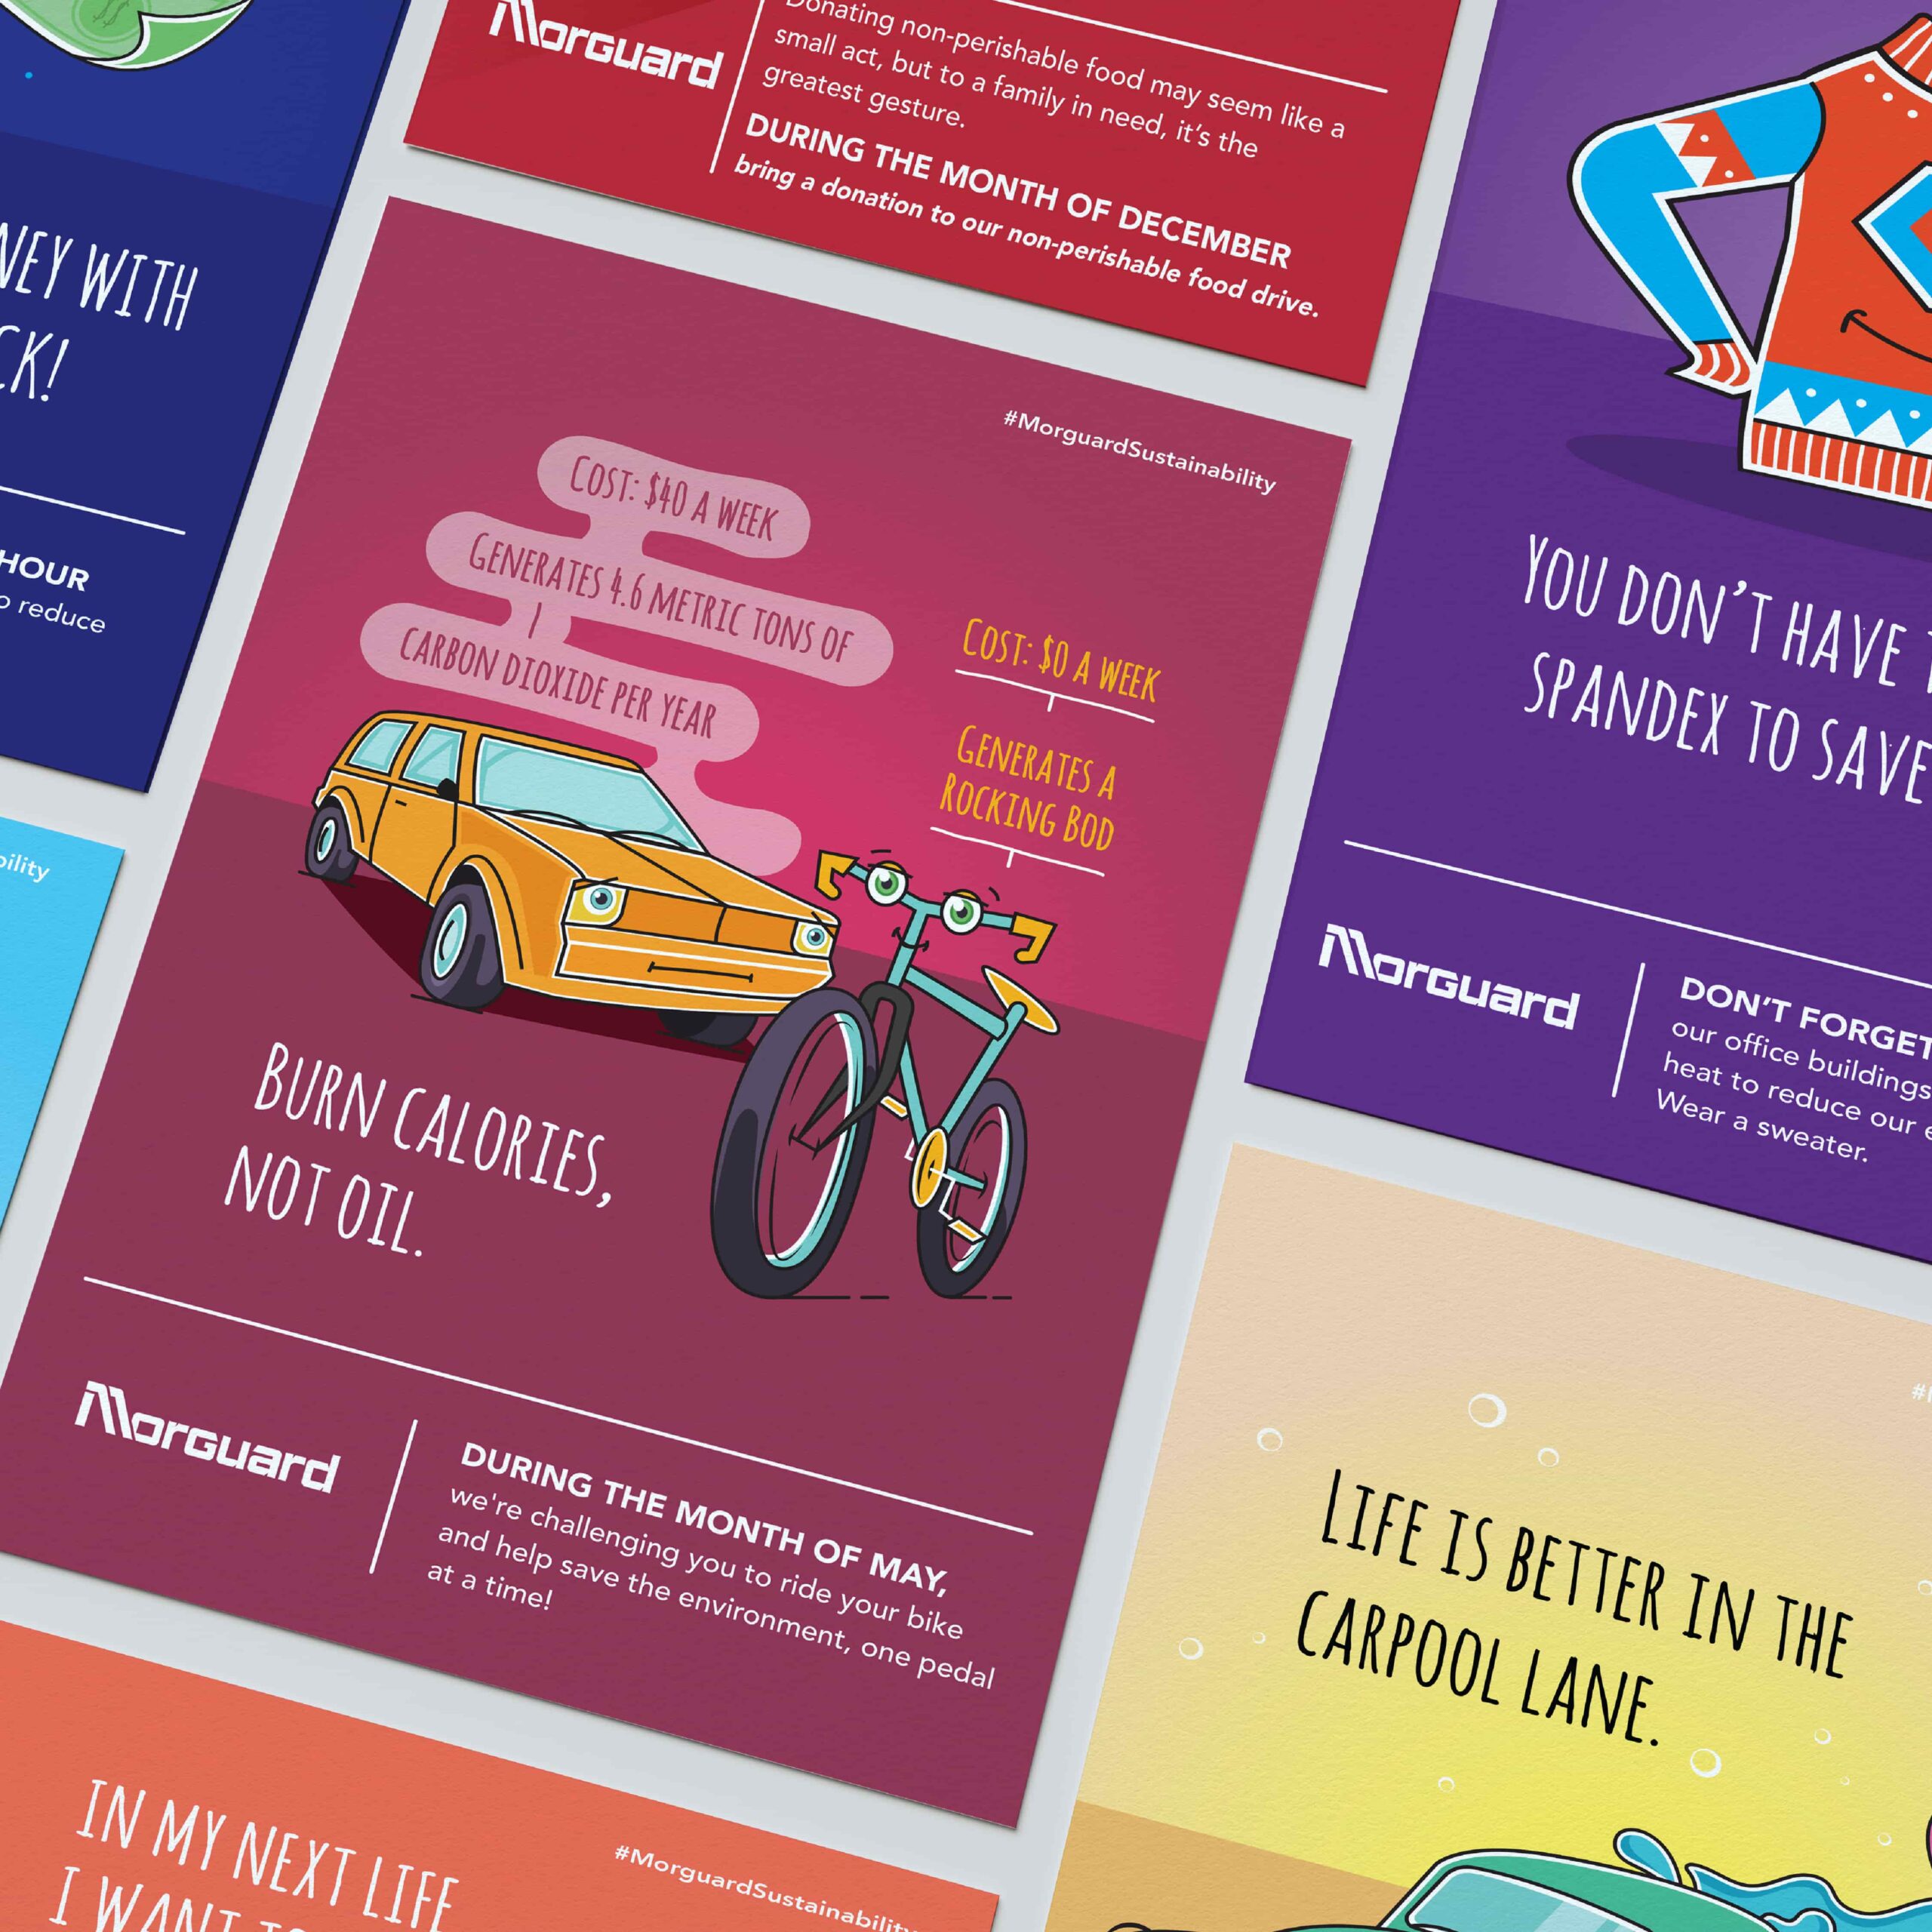 Brightly coloured posters from Morguard's 2018 campaign, encouraging sustainable actions.